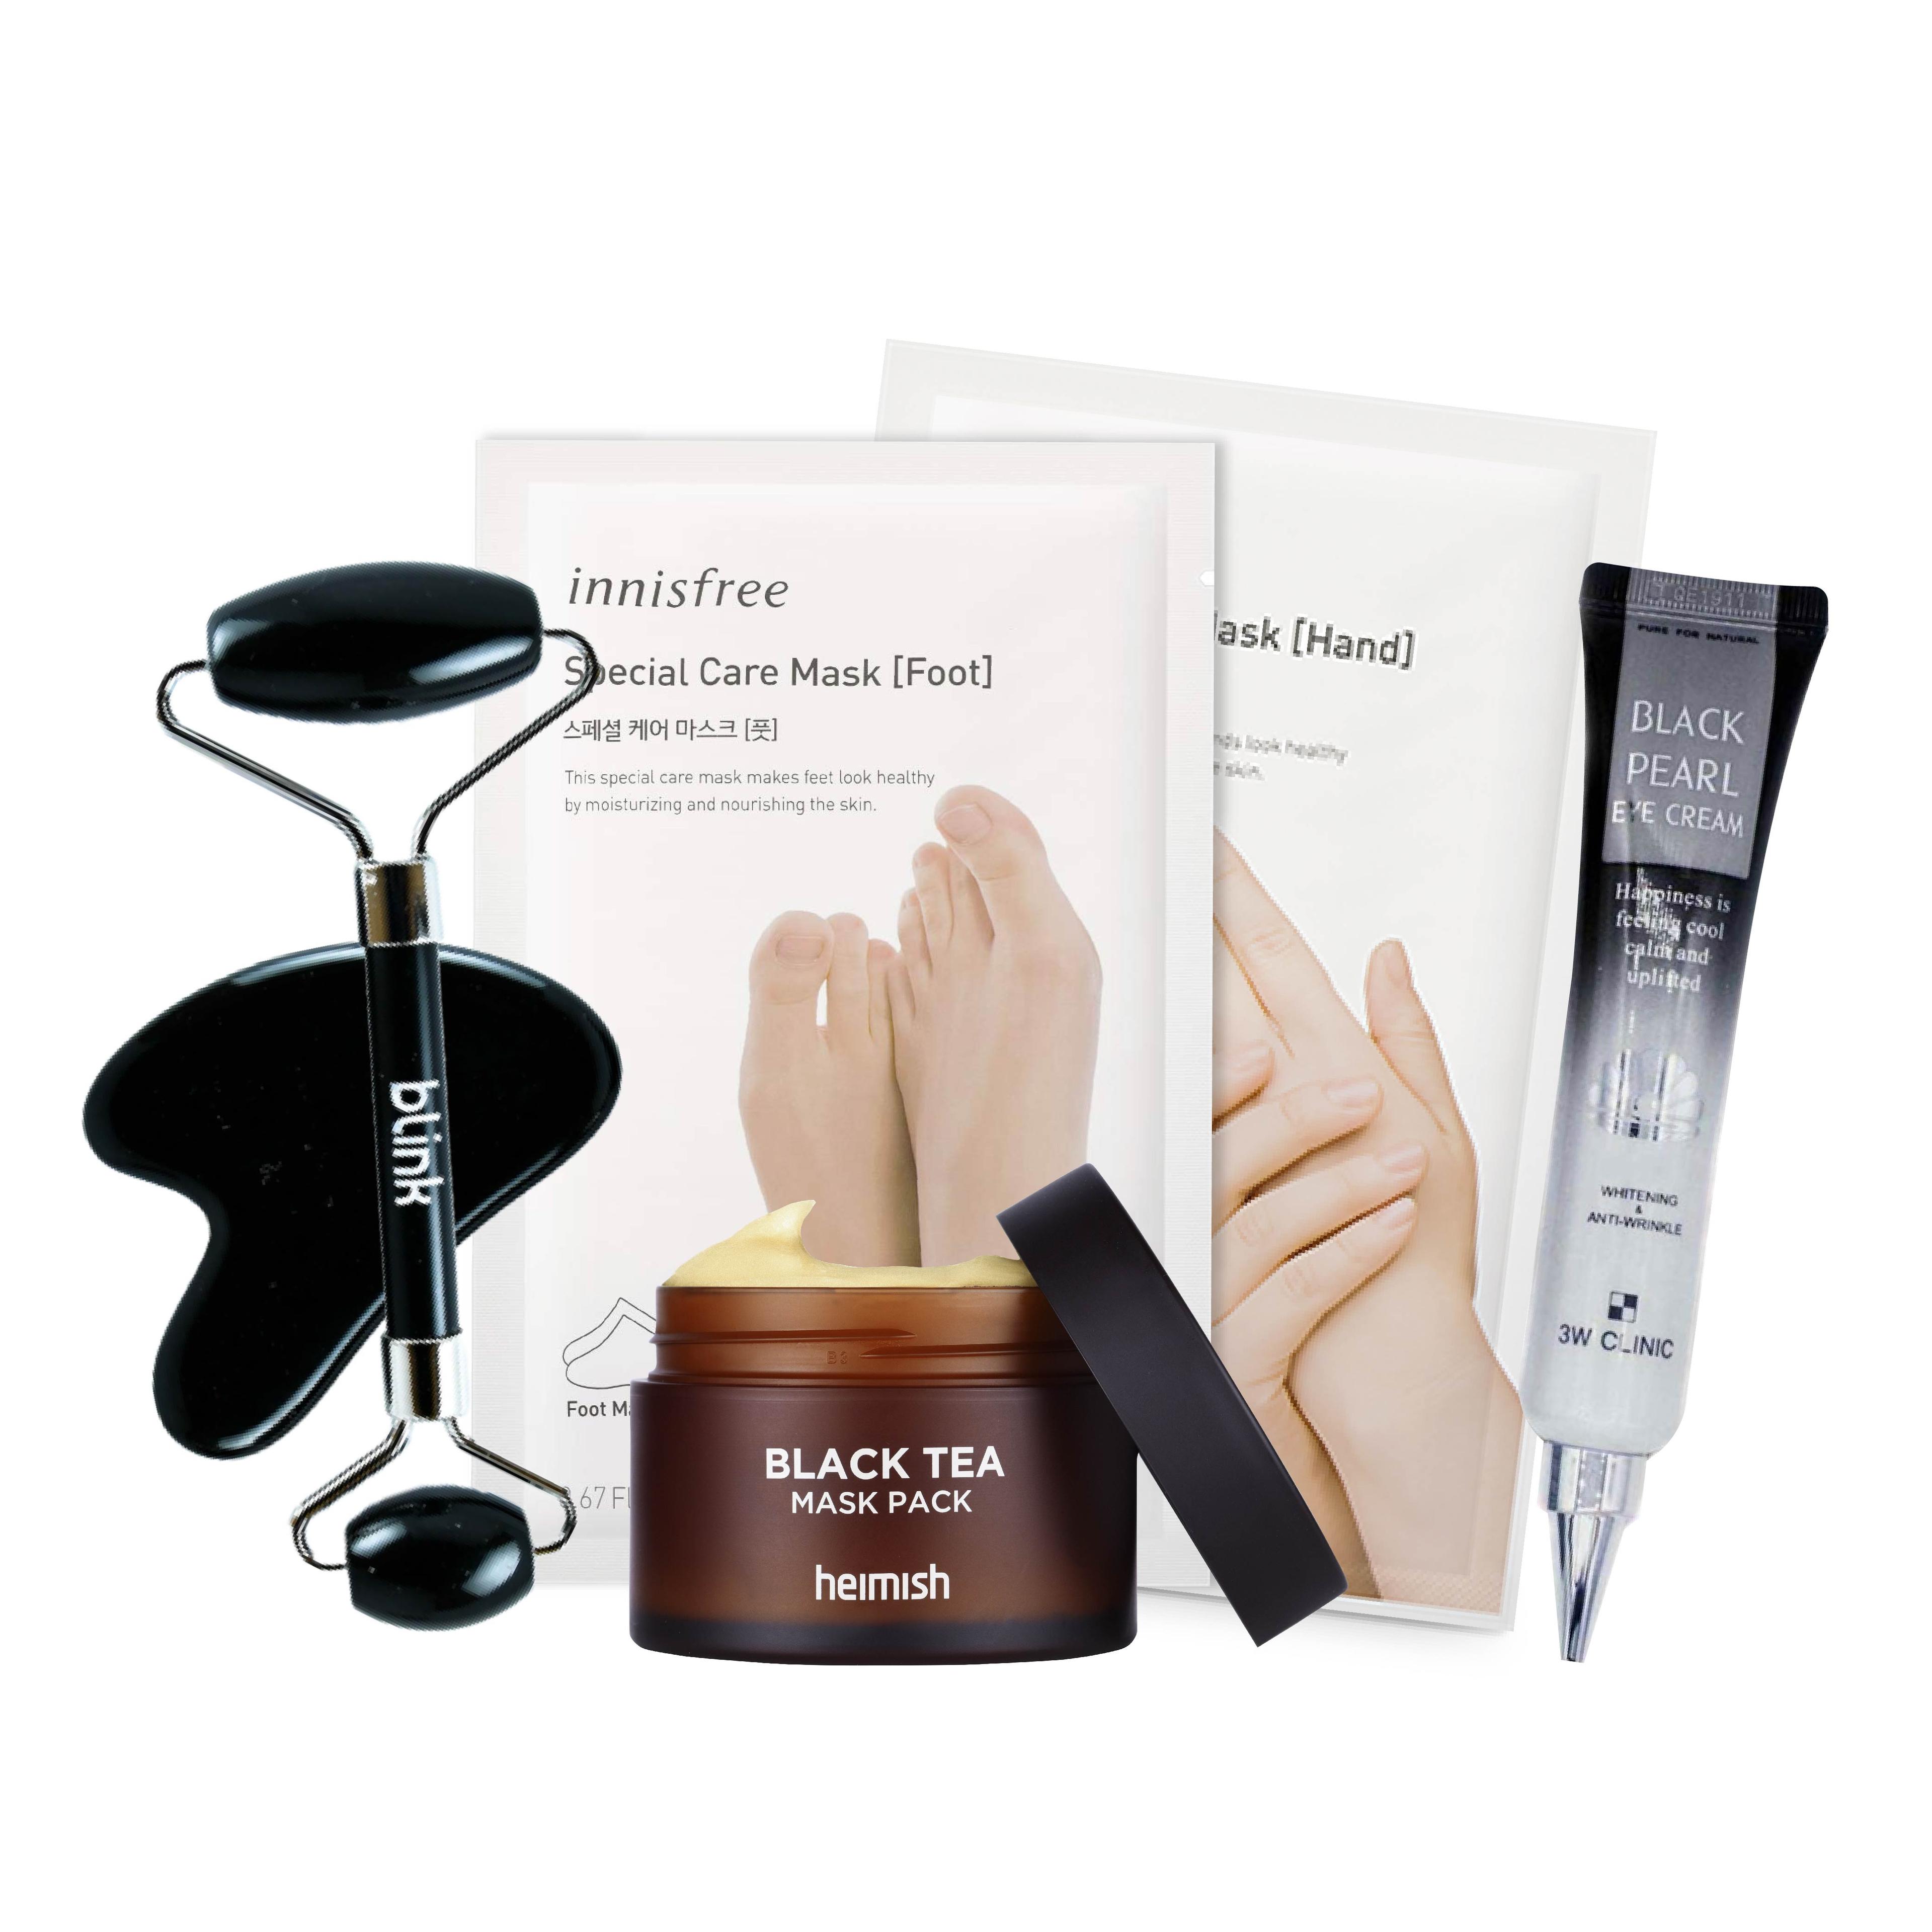 Gift Bundle #11 [Black Obsidian Facial Roller with Gua Sha Set, Special Care Mask [Hand], Special Care Mask [Foot], Black Pearl Eye Cream, Black Tea Mask Pack]